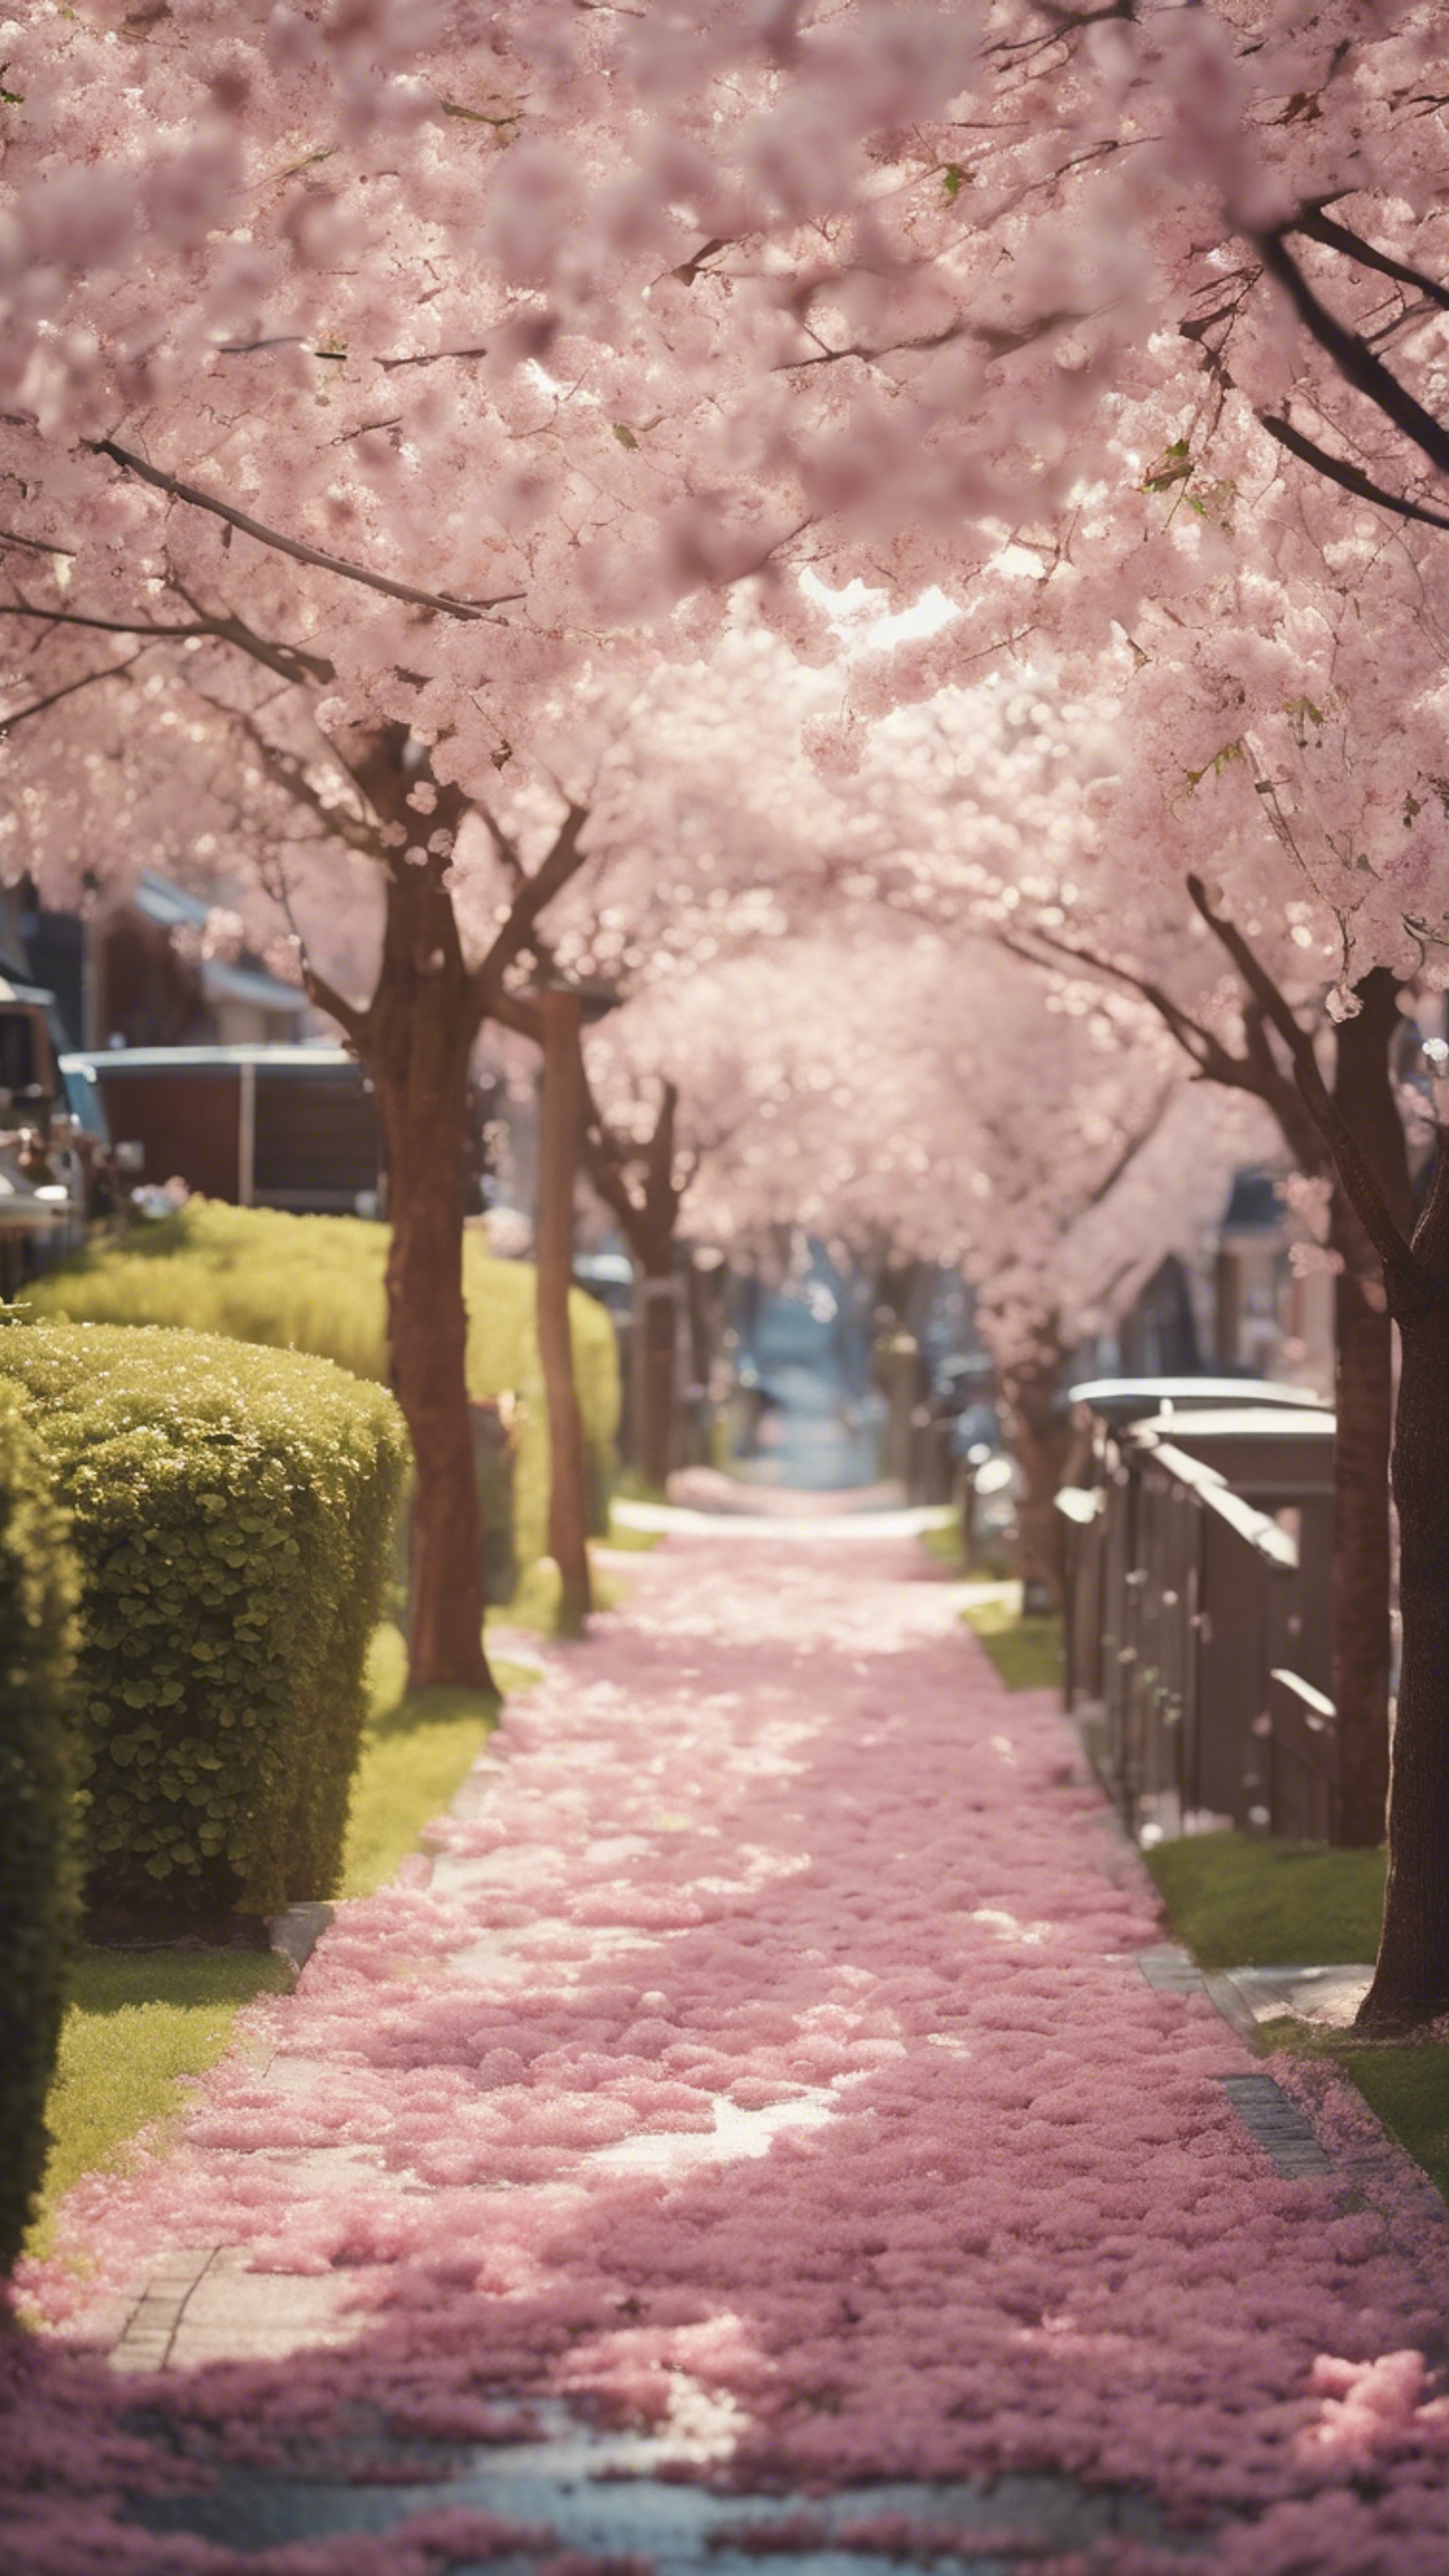 A suburban street lined with houses, and cherry blossom trees showering the pathway with petals, giving an ethereal feel to a sunny spring morning. Papel de parede[d085be0bf6ea43718843]